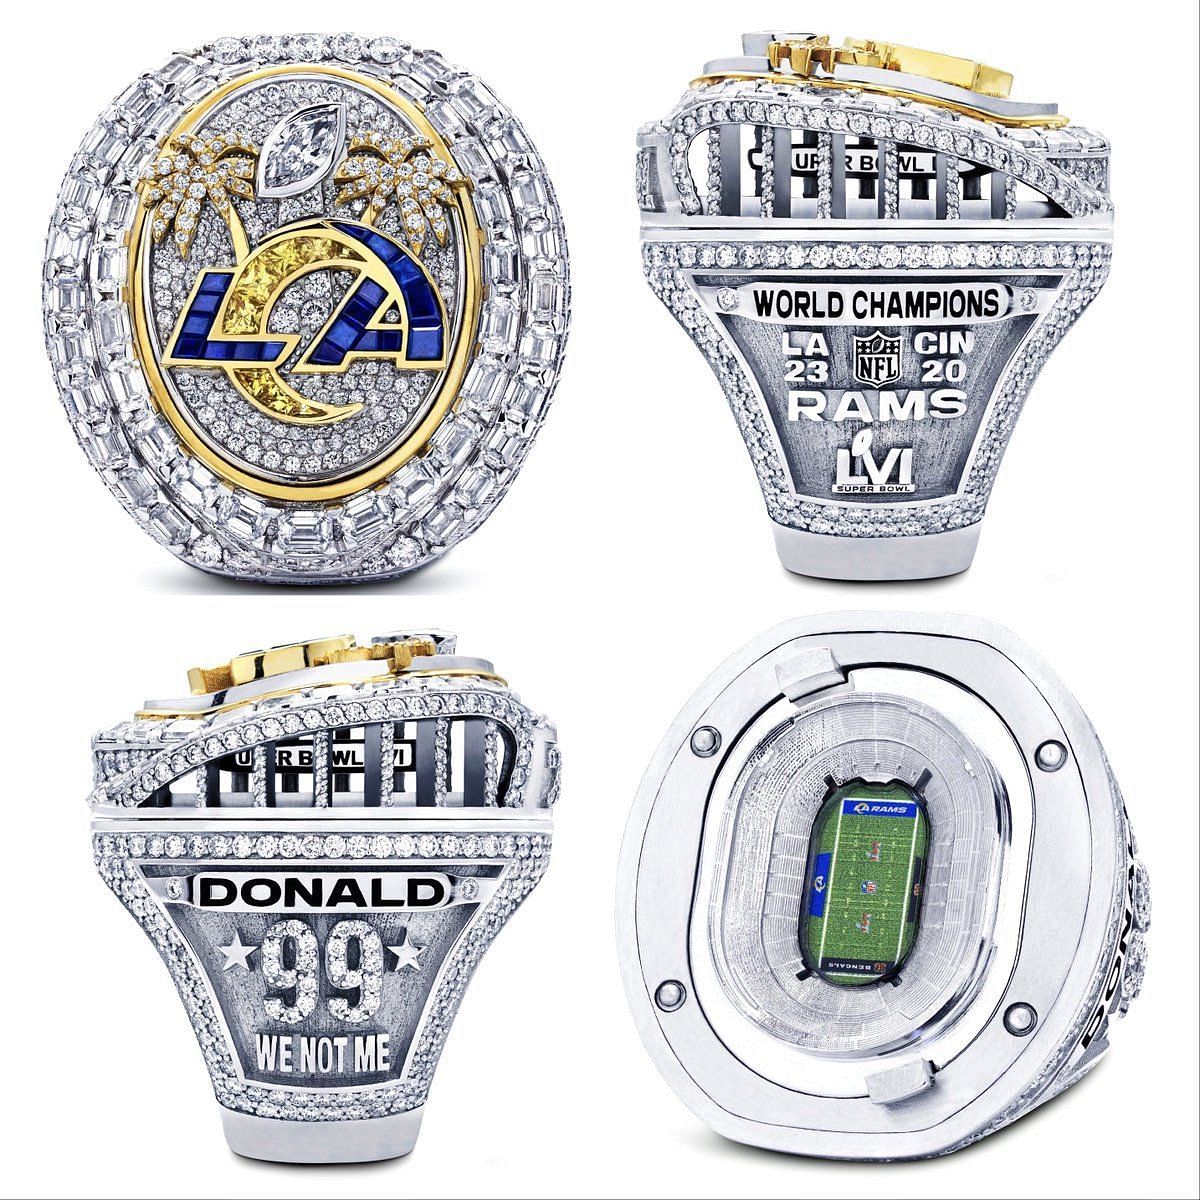 Rams' Super Bowl ring throws subtle shade at St. Louis